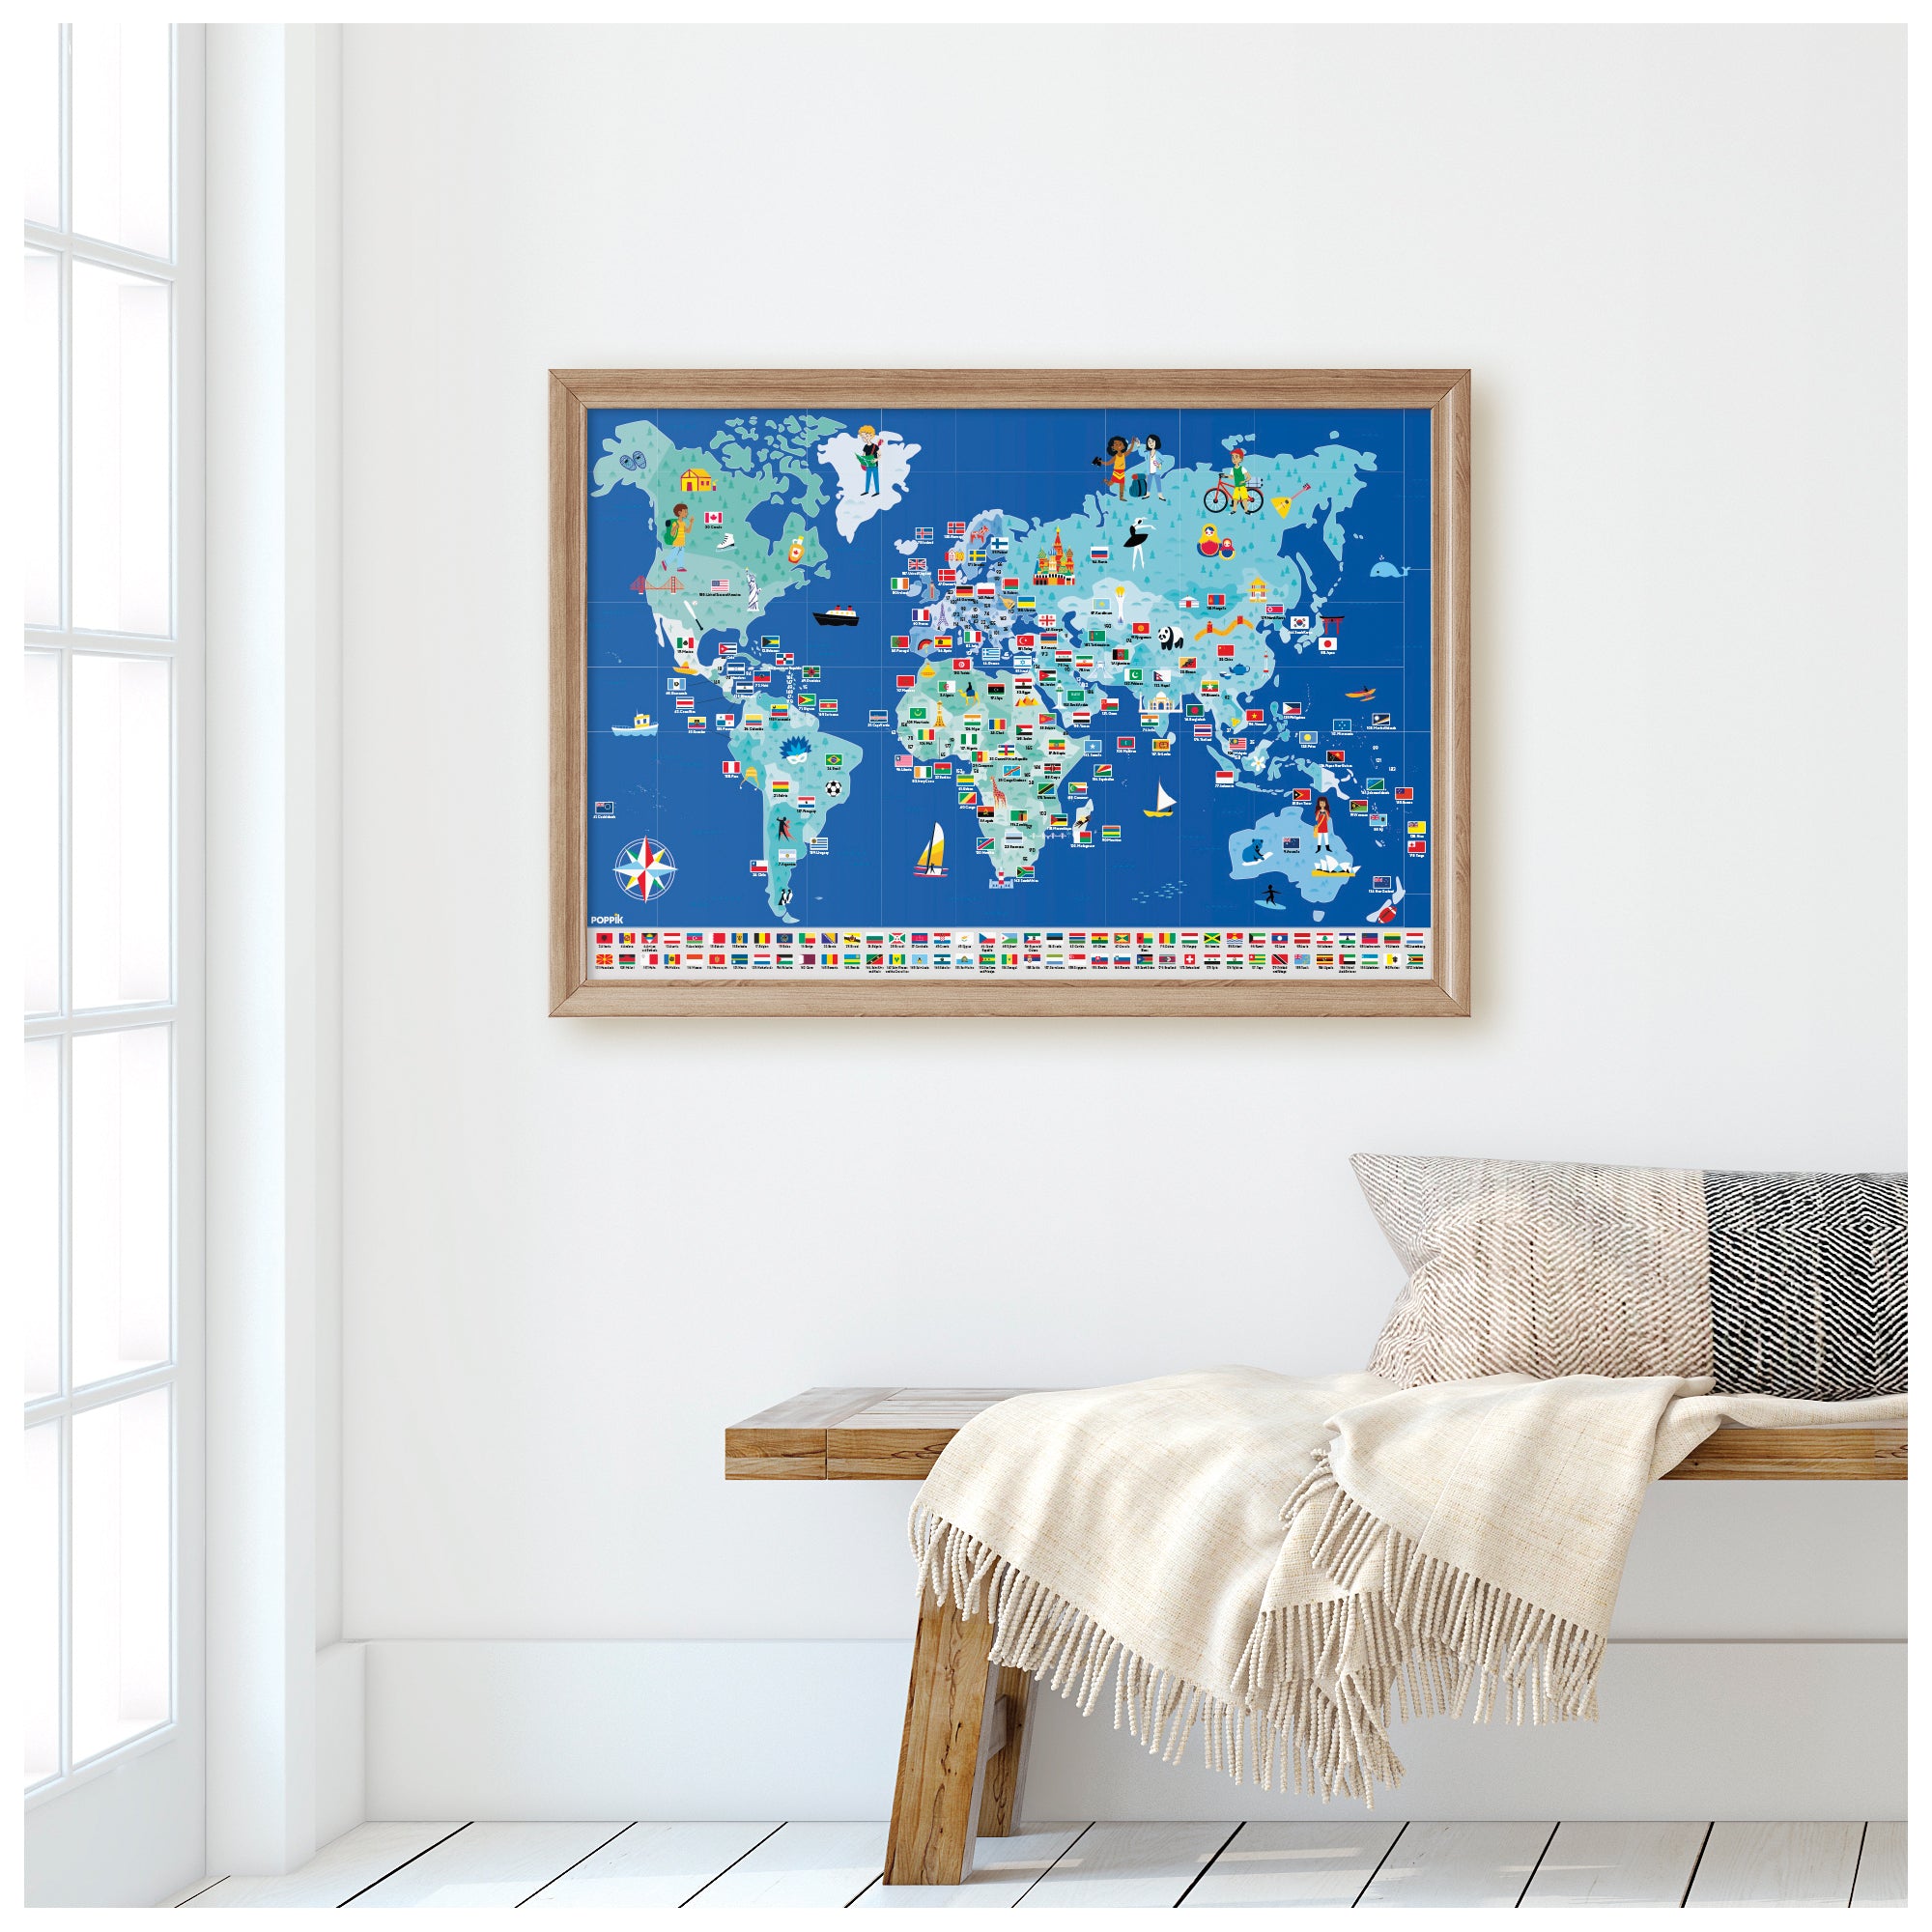 World map with flags framed and hung on a white wall. Under the map is a bench with an ivory colored blanket and a pillow placed on top of a white floor.